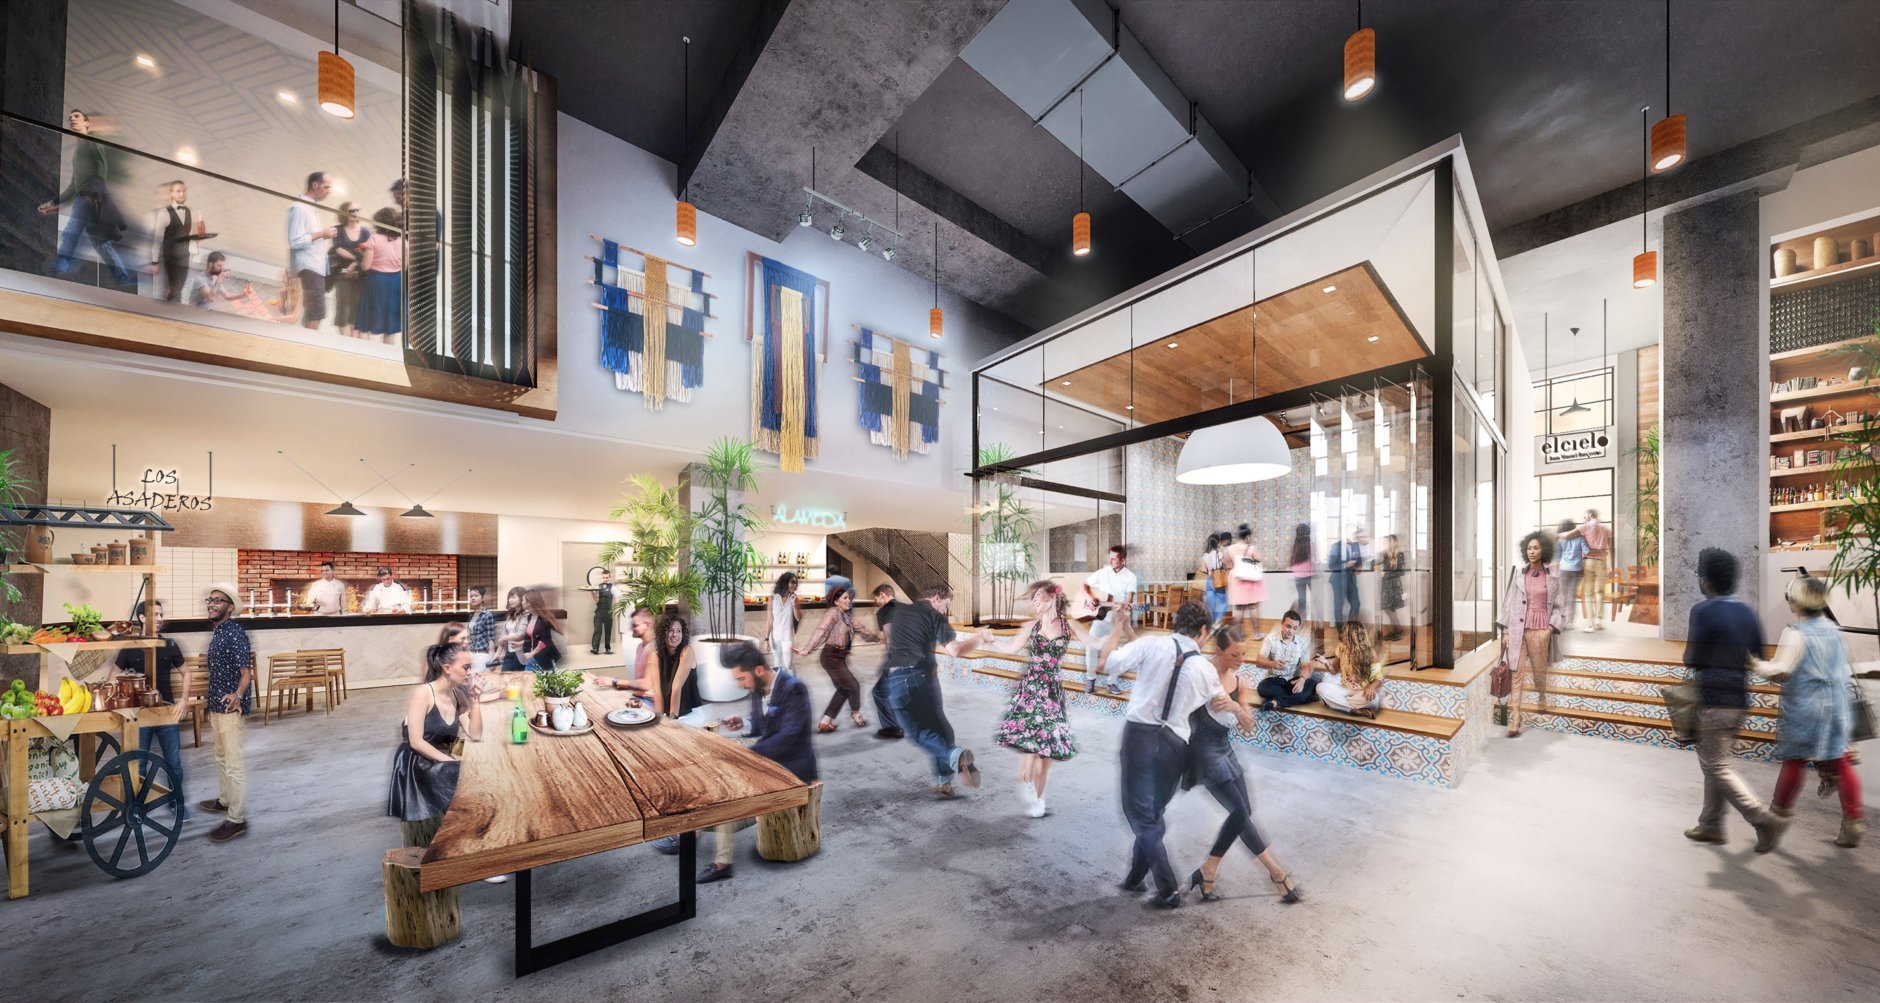 In addition to food and art, Edens says it will serve as a home for music, fashion, film, sport, travel and dance. (Courtesy Edens)